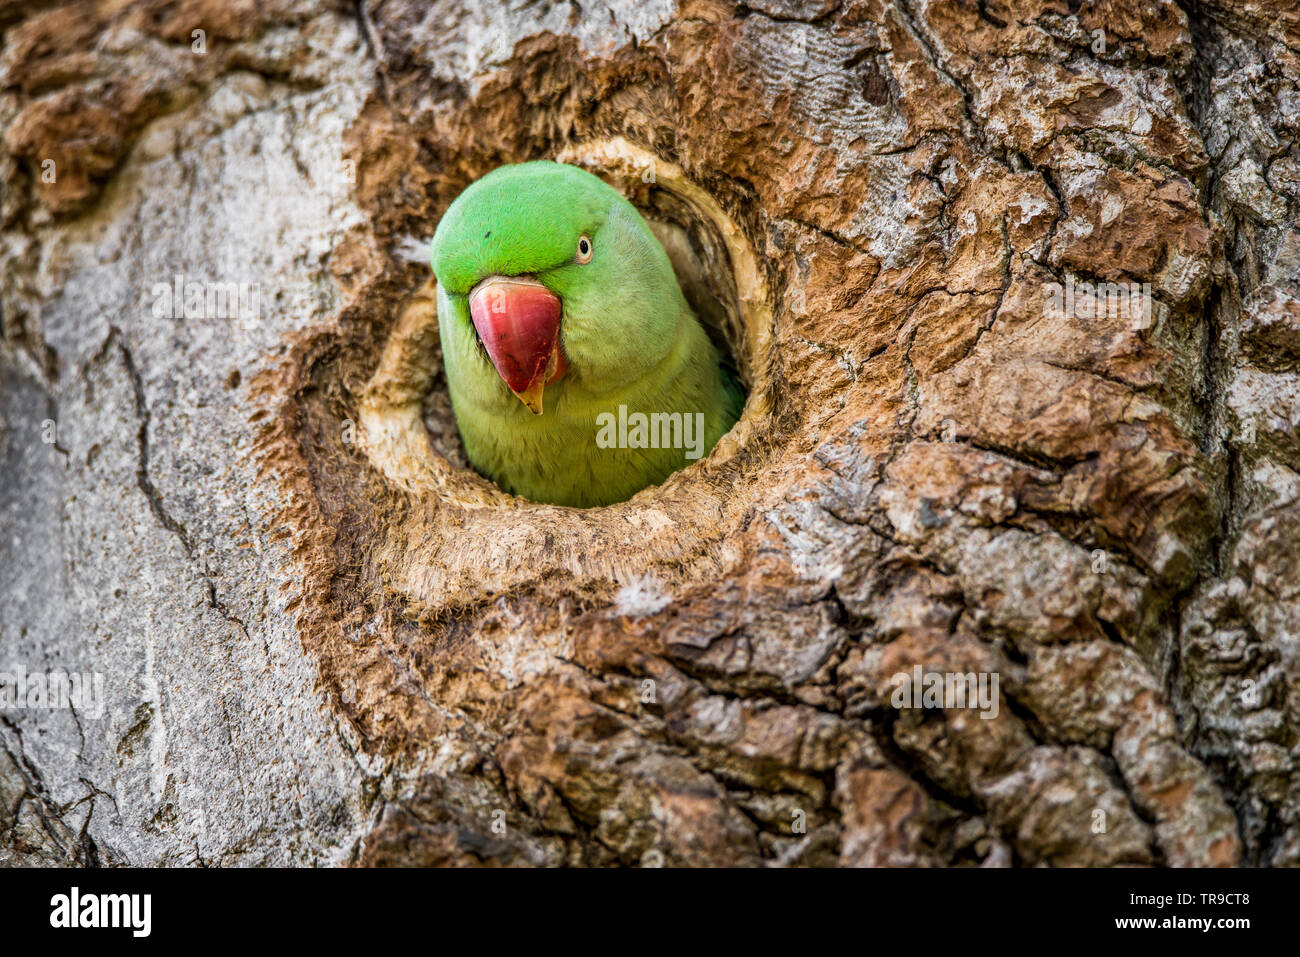 Panchi - Name: Green Ring-Neck Parakeet Also Known as: Rose Ringed Parakeet  Specialty: It is one of four recognized subspecies of Ring-necked Parakeets  - and is the most commonly kept in captivity.